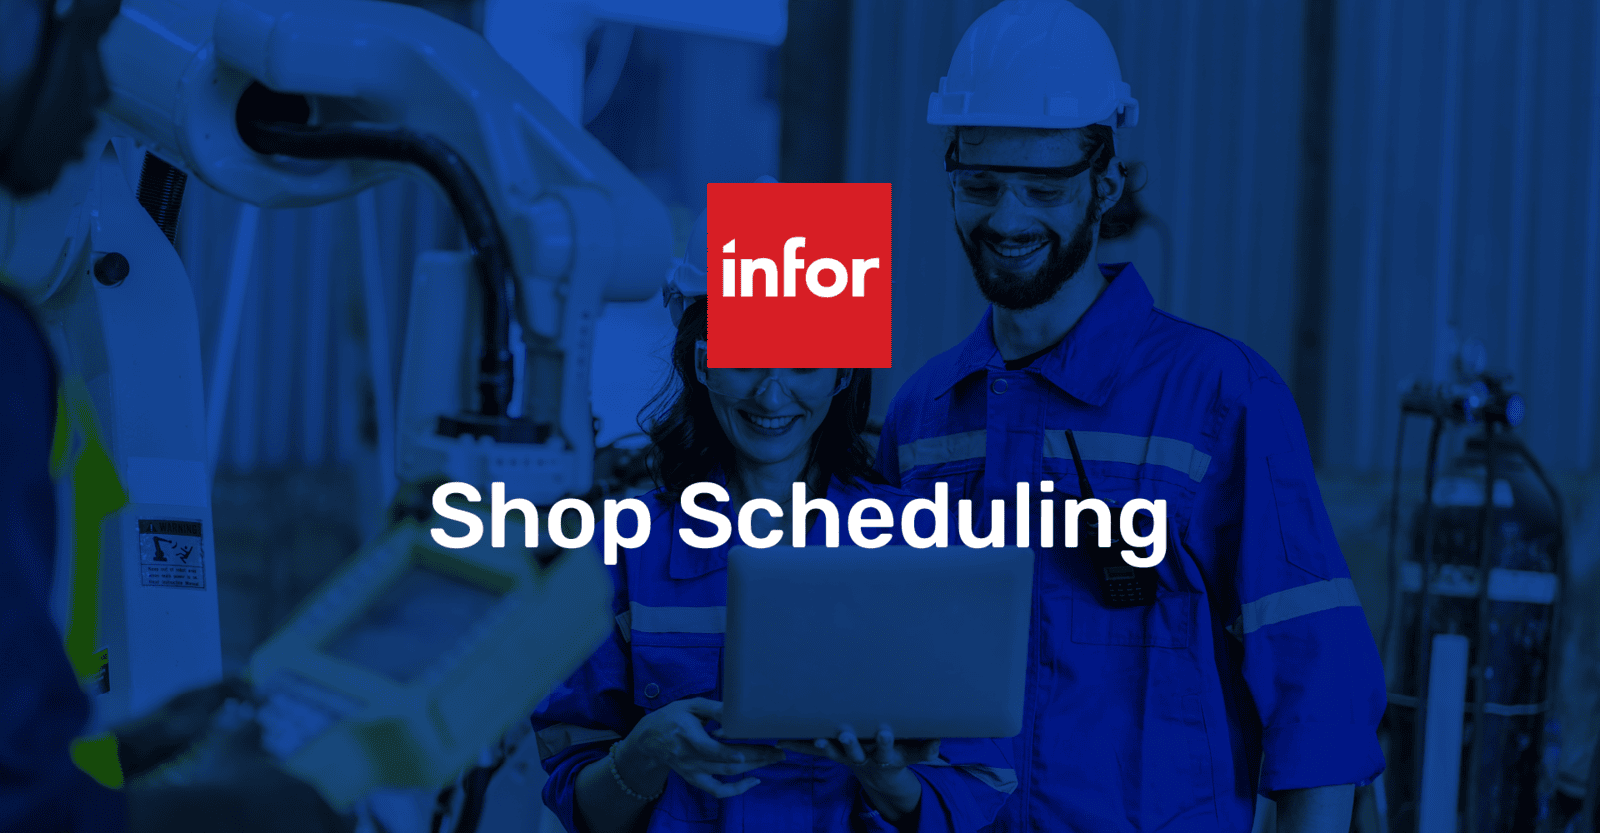 As a complex manufacturer, how critical is improving shop scheduling with your new ERP system?